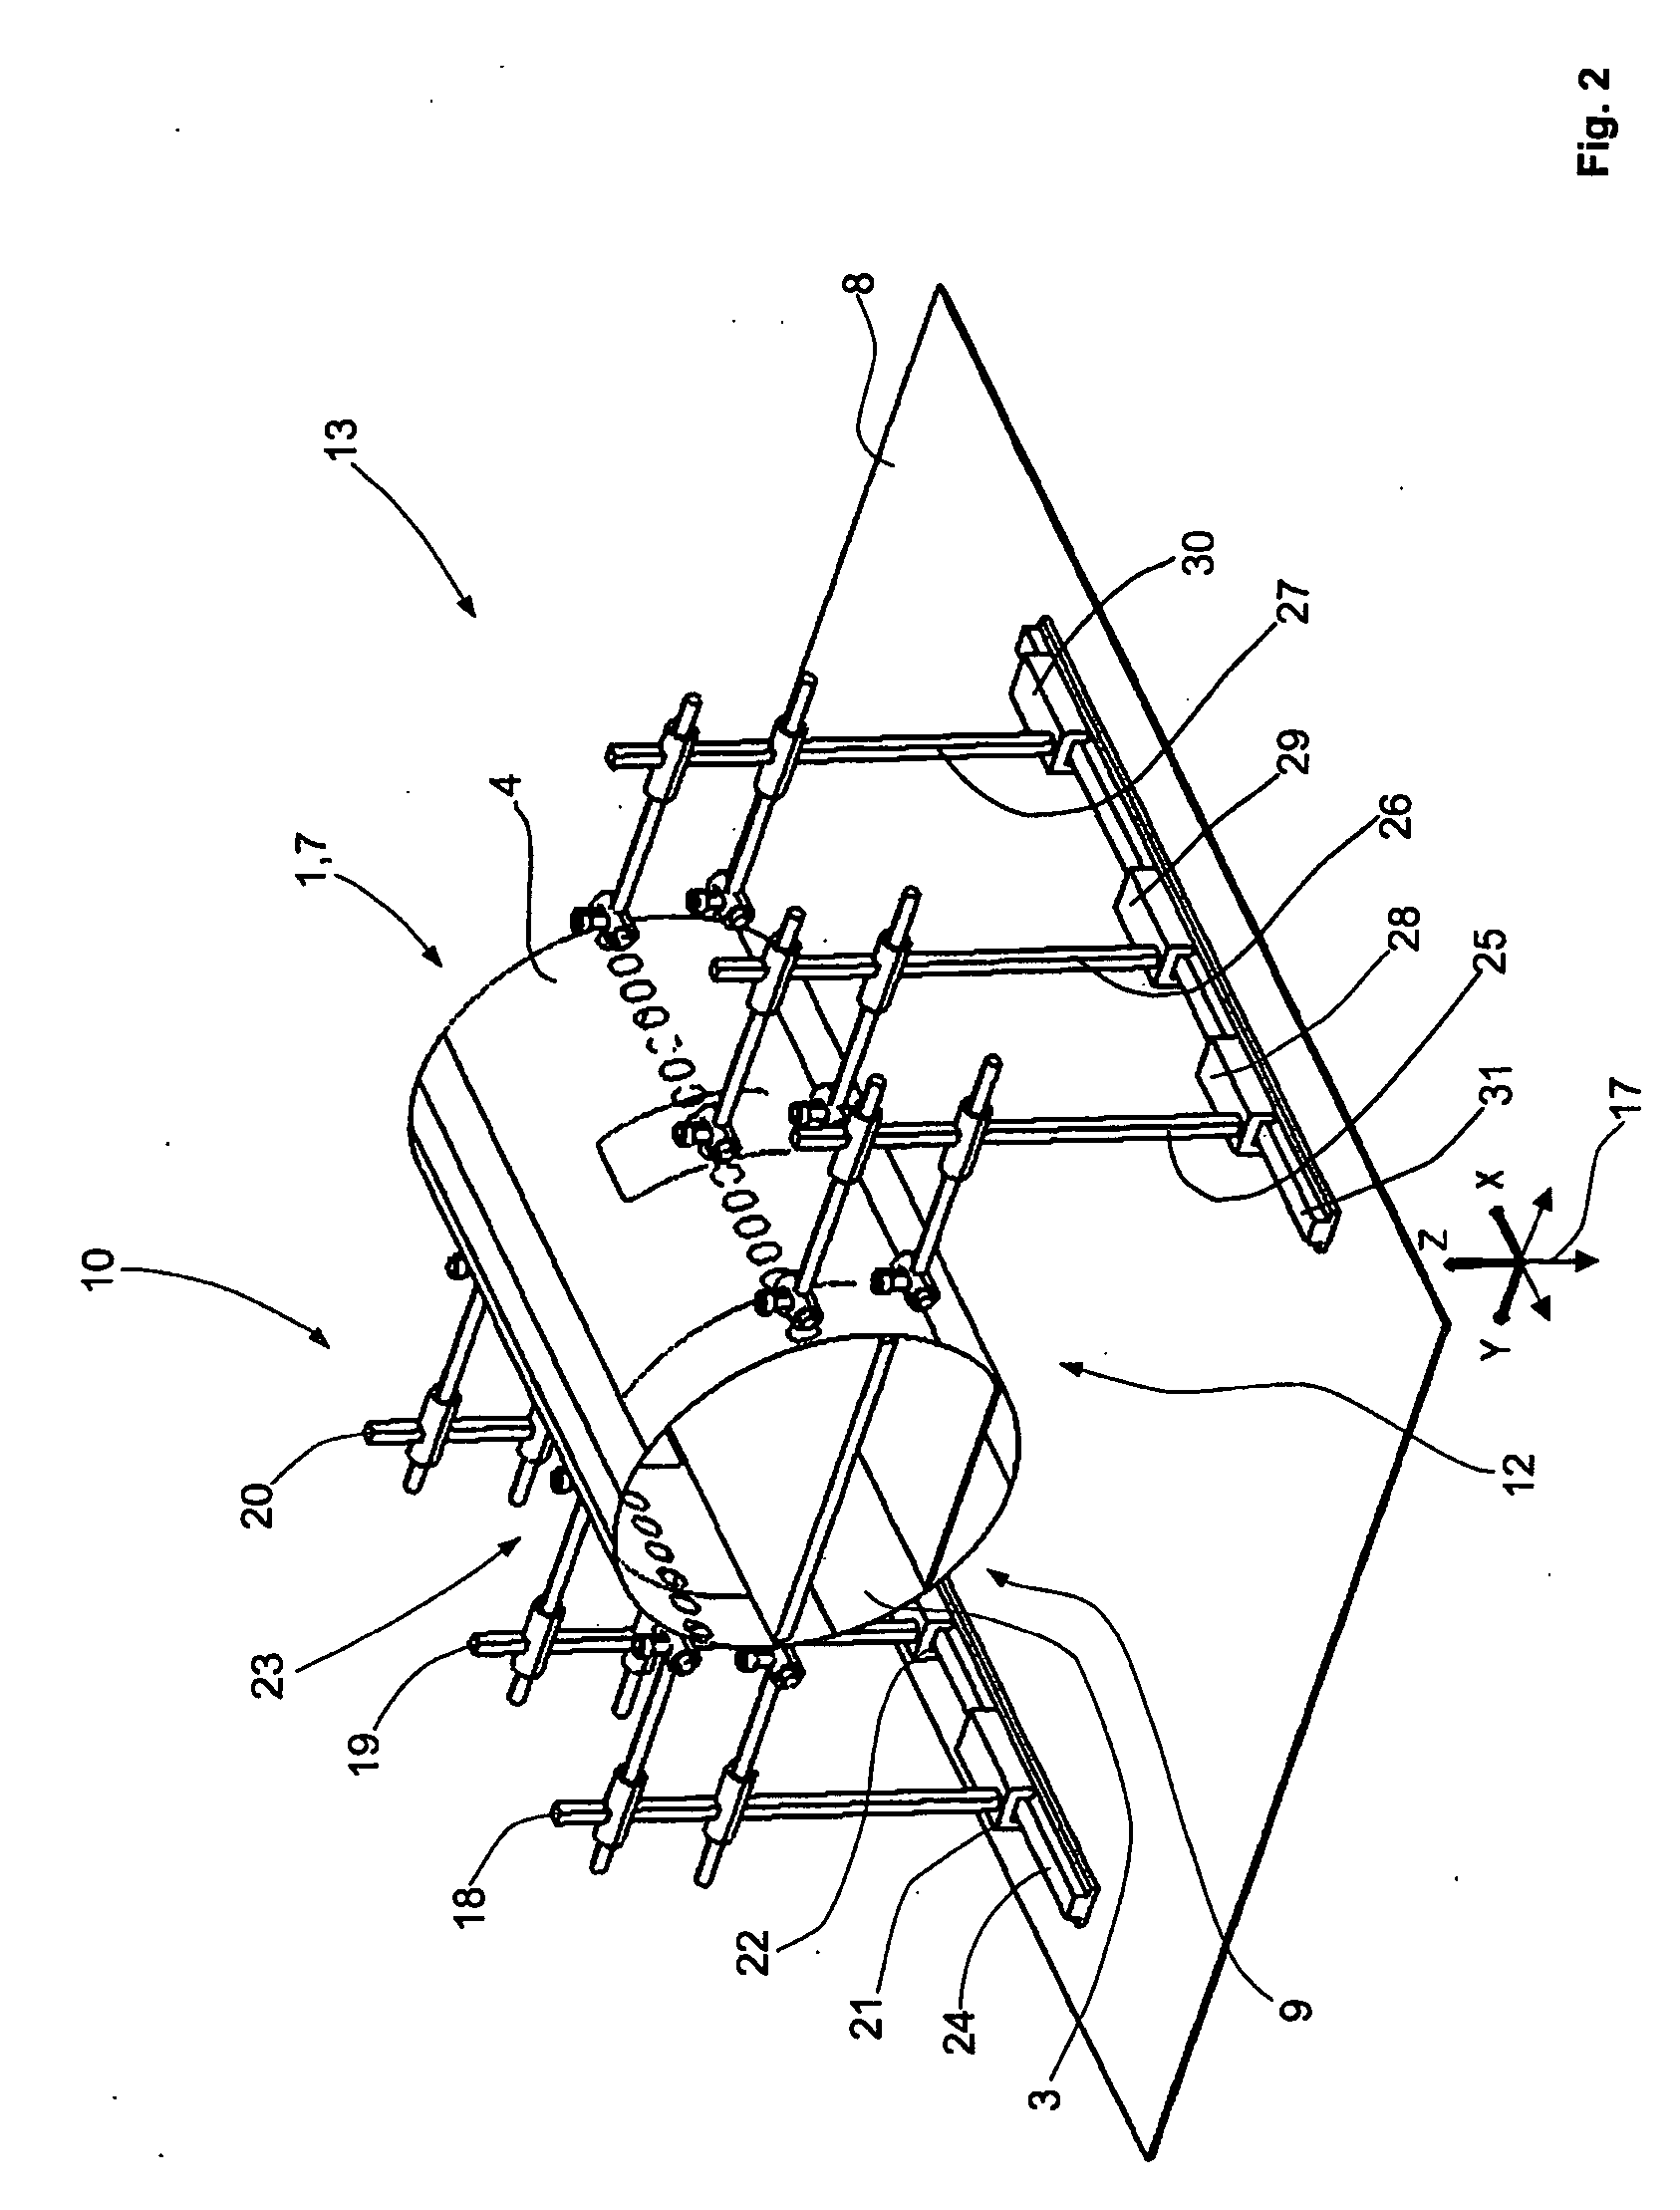 Device and method for joining and tacking sections for transportation vehicles